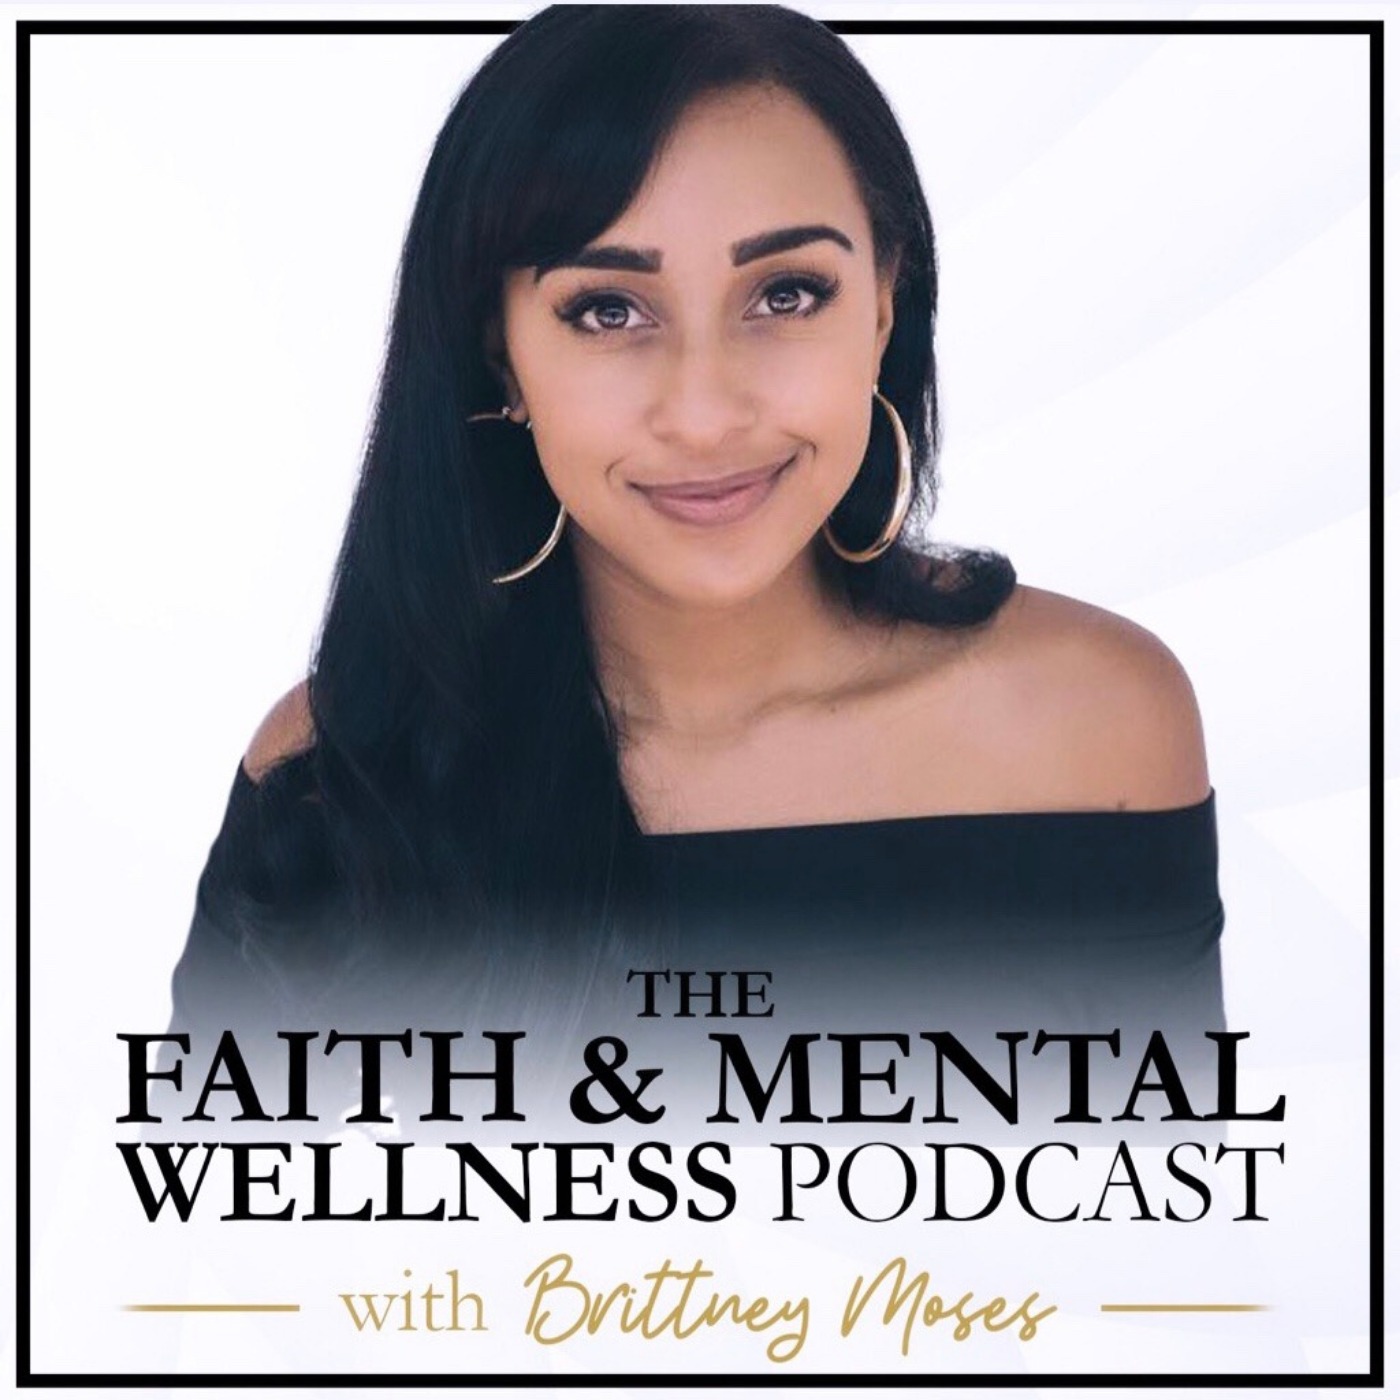 001: ”Why Did You Decide to Pursue Faith and Mental Health?”